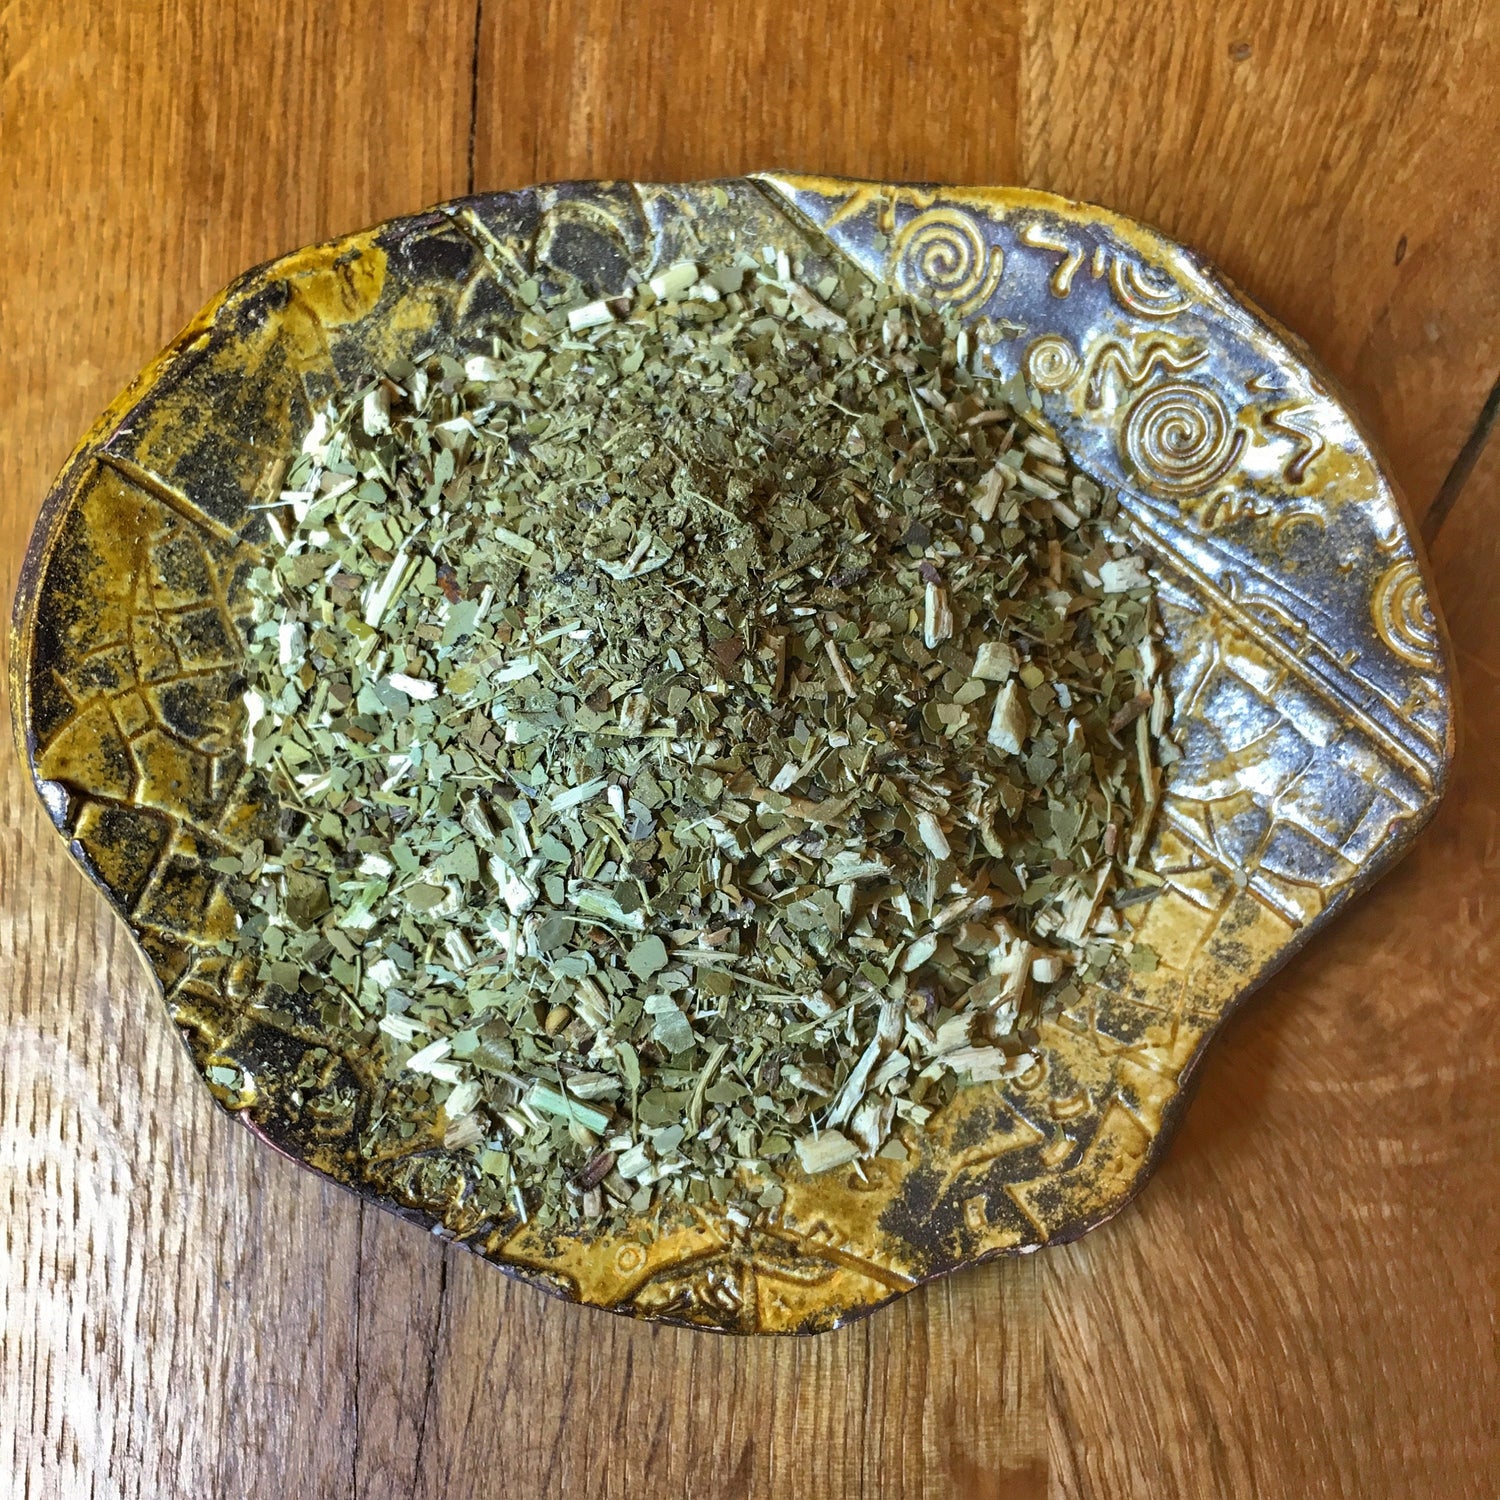 Dried Yerba Mate leaves, Ilex paraguariensis, for chimarrão, close-up of traditional South American herbal tea.